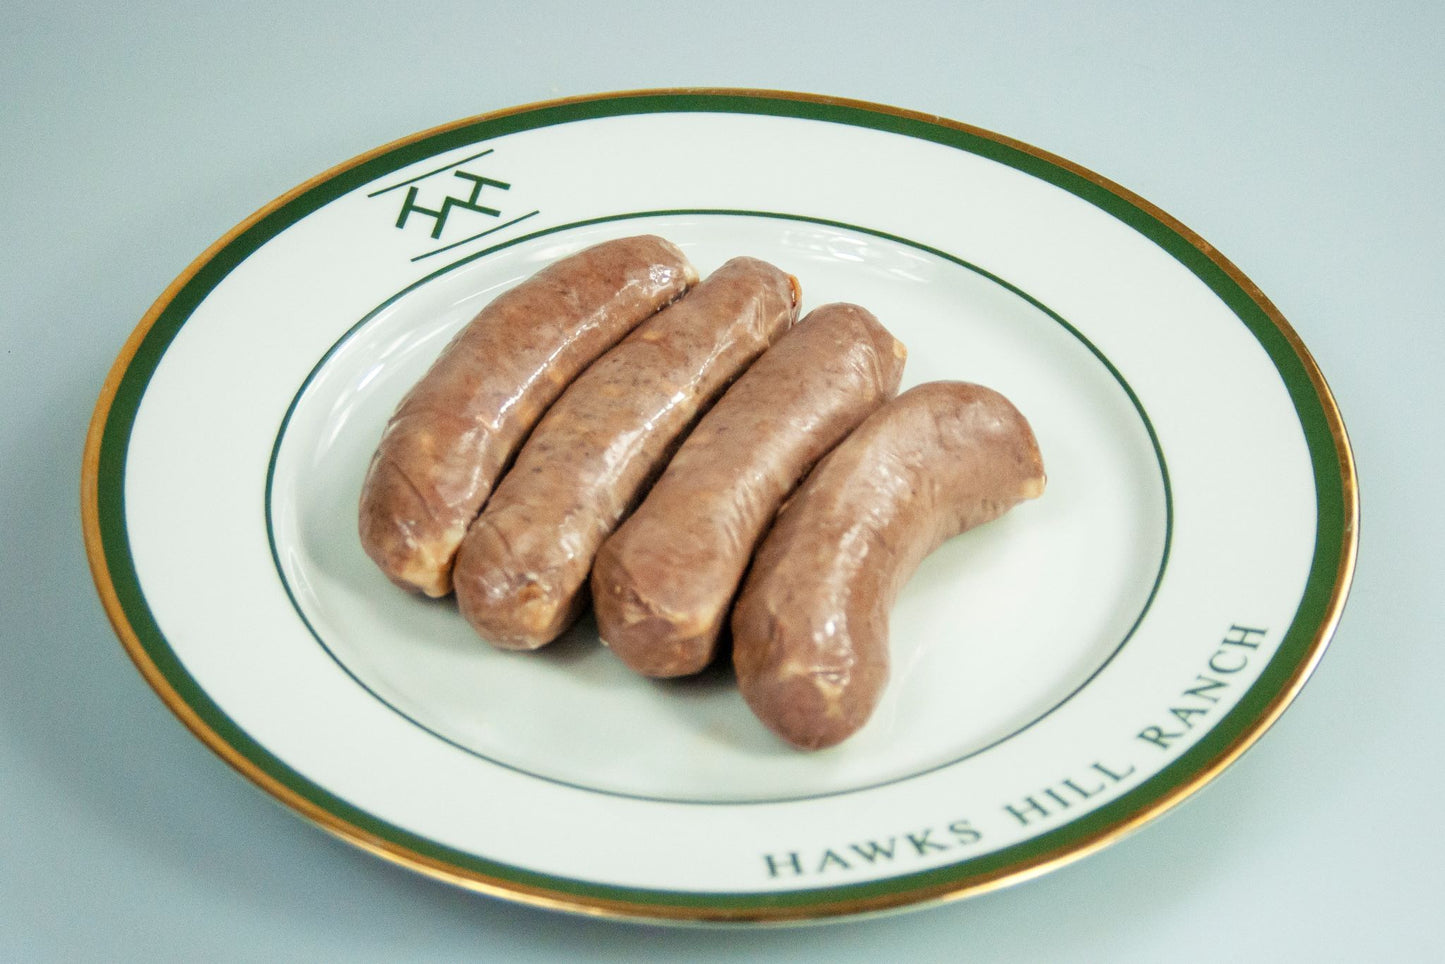 100% Full Blood Wagyu Philly Cheese Brats (4 pack)